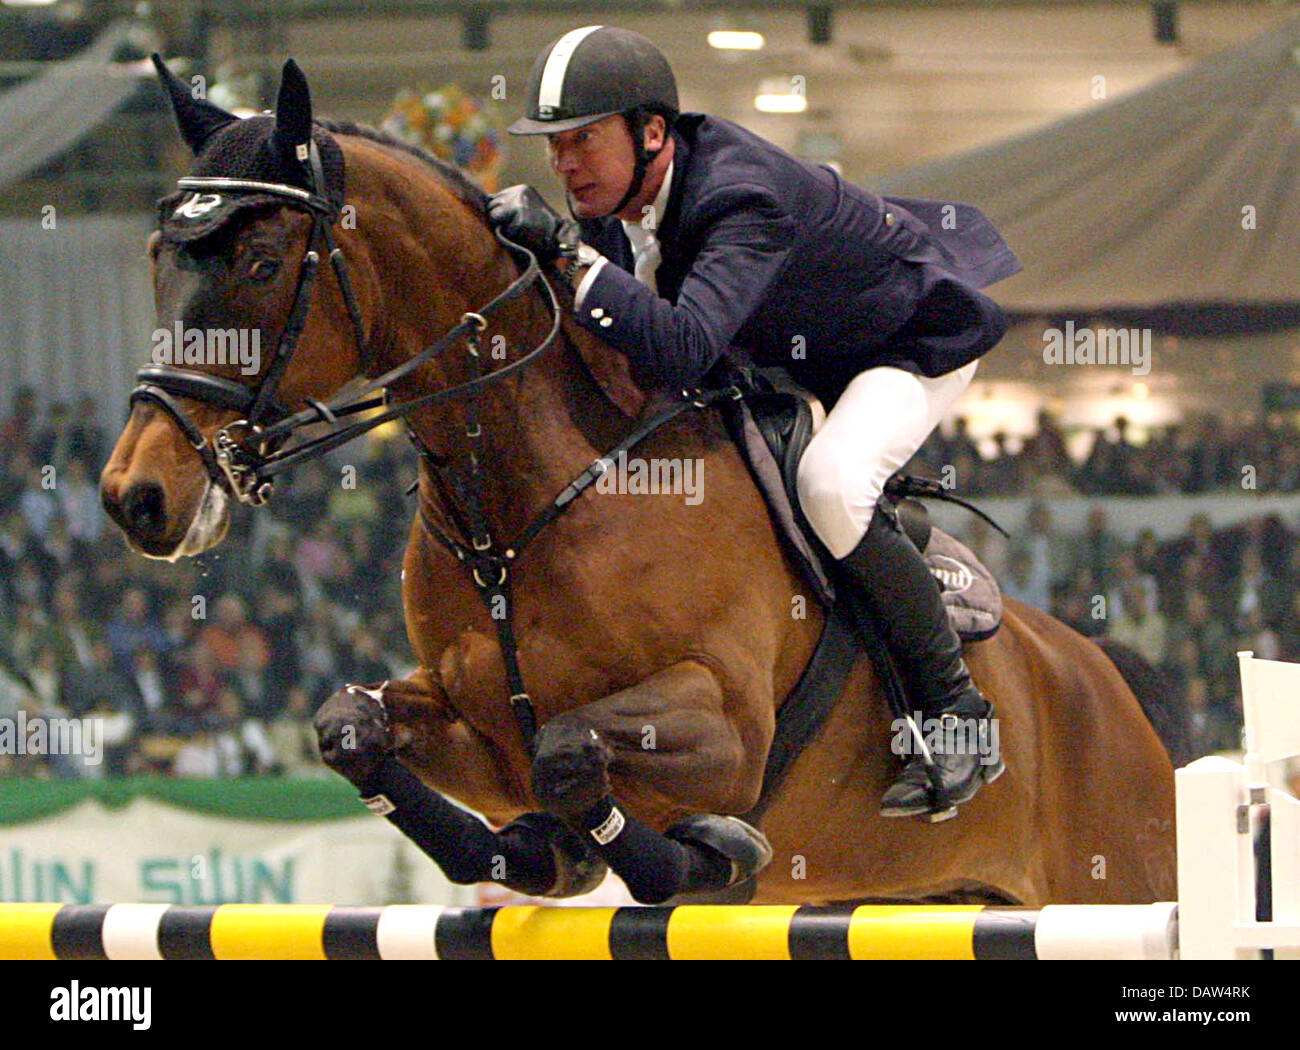 Show jumper Thomas Voss is pictured in action on his horse Leonardo at the Grand prix of Neumuenster, Germany, Sunday 18 February 2007. The 48 year-old rider won the competition.  Photo: Ulrich Perrey Stock Photo